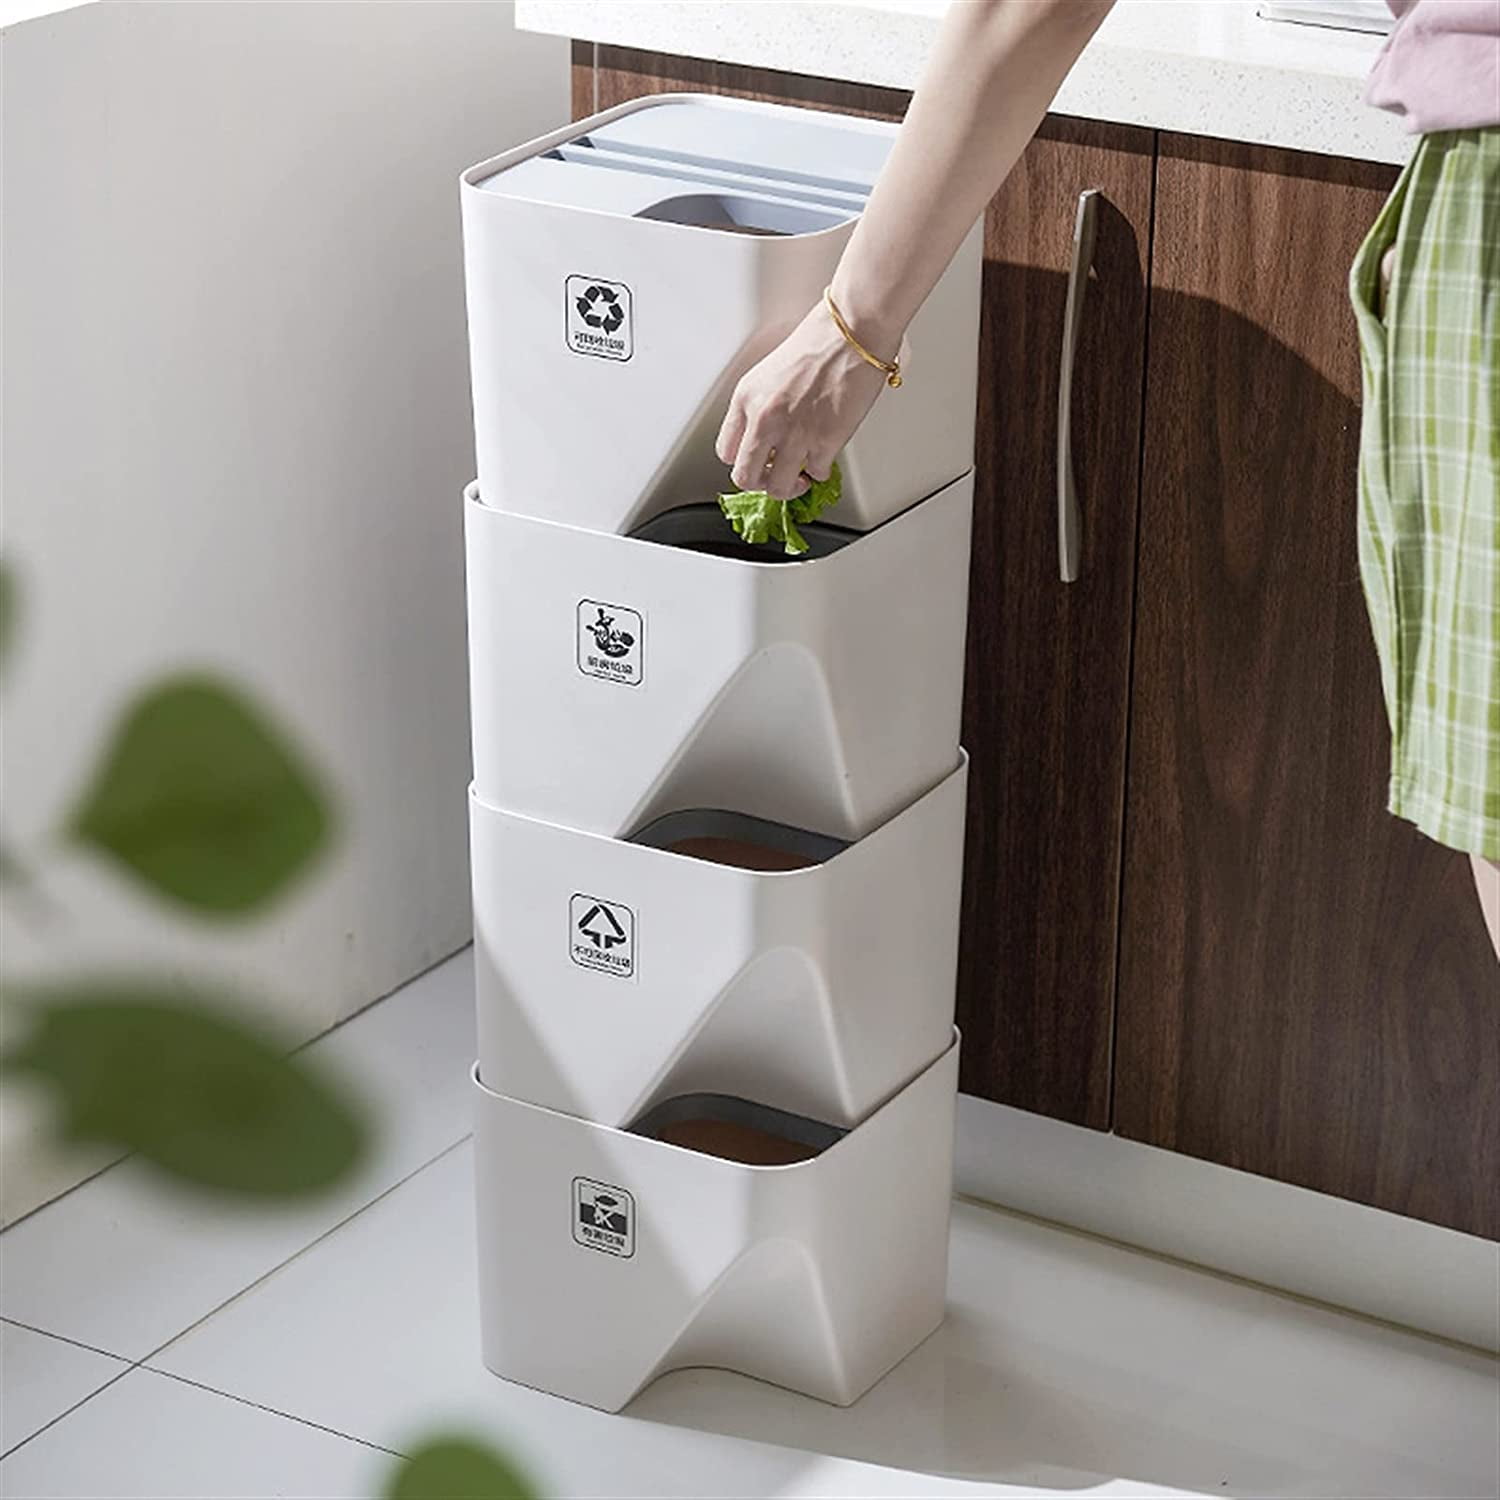 Waste Bin Kitchen Bathroom Dry and Wet Separation Trash Can Double Compartments for Waste Separation Recycling Bin Grey/White 